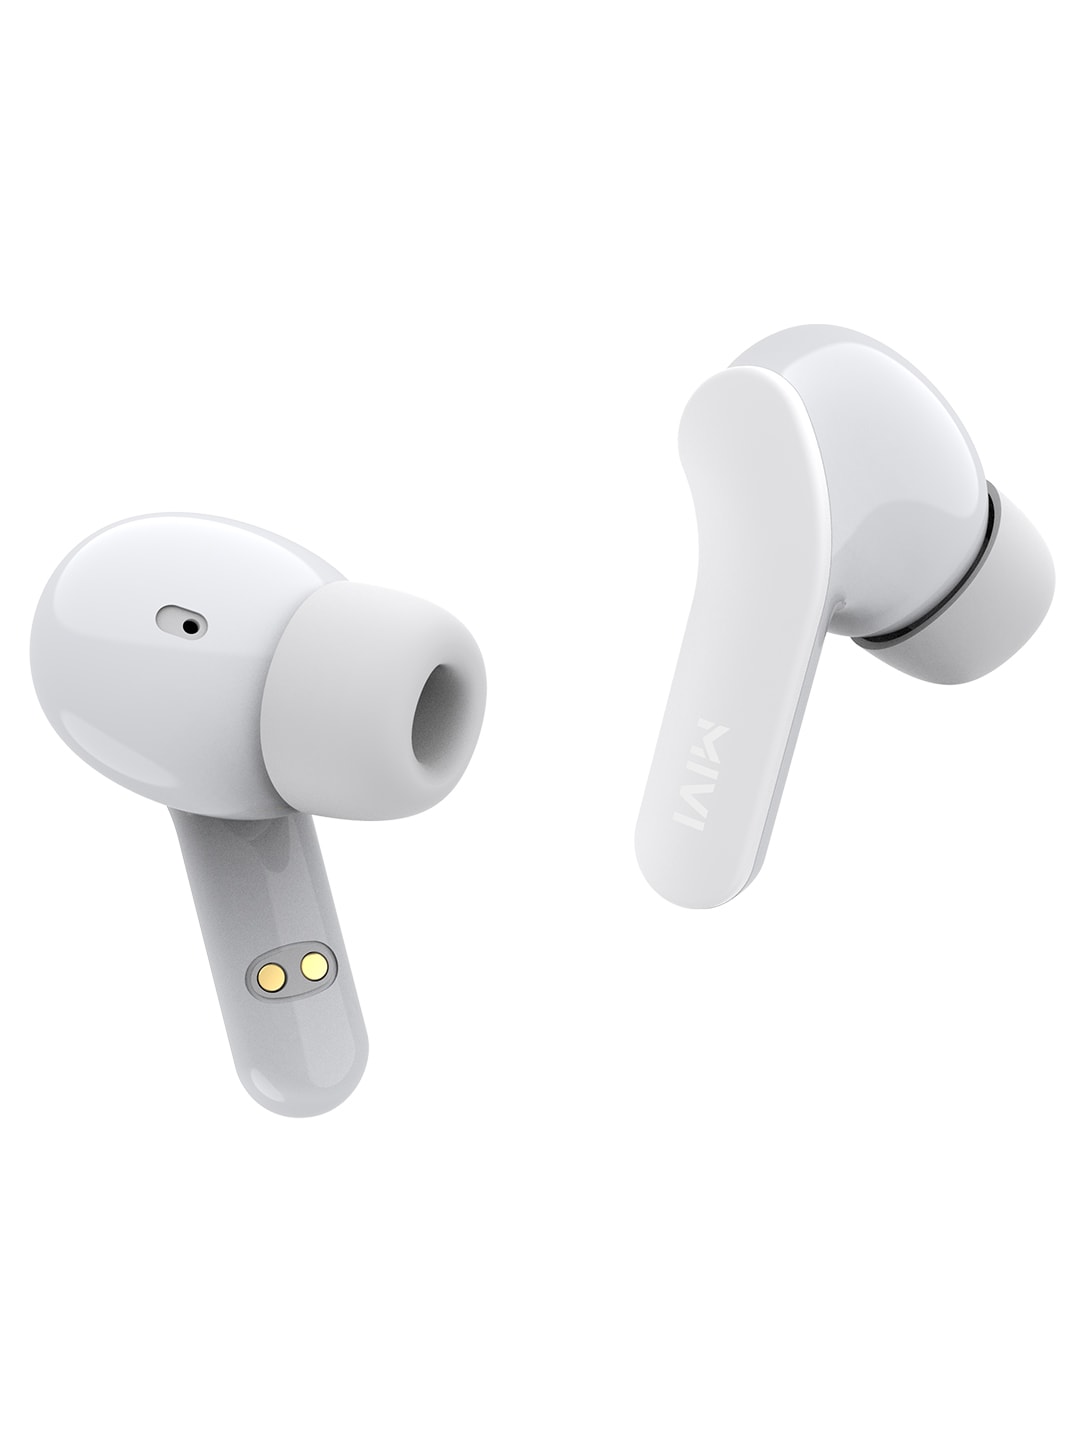 Mivi DuoPods A25 True Wireless Earbuds-White Price in India